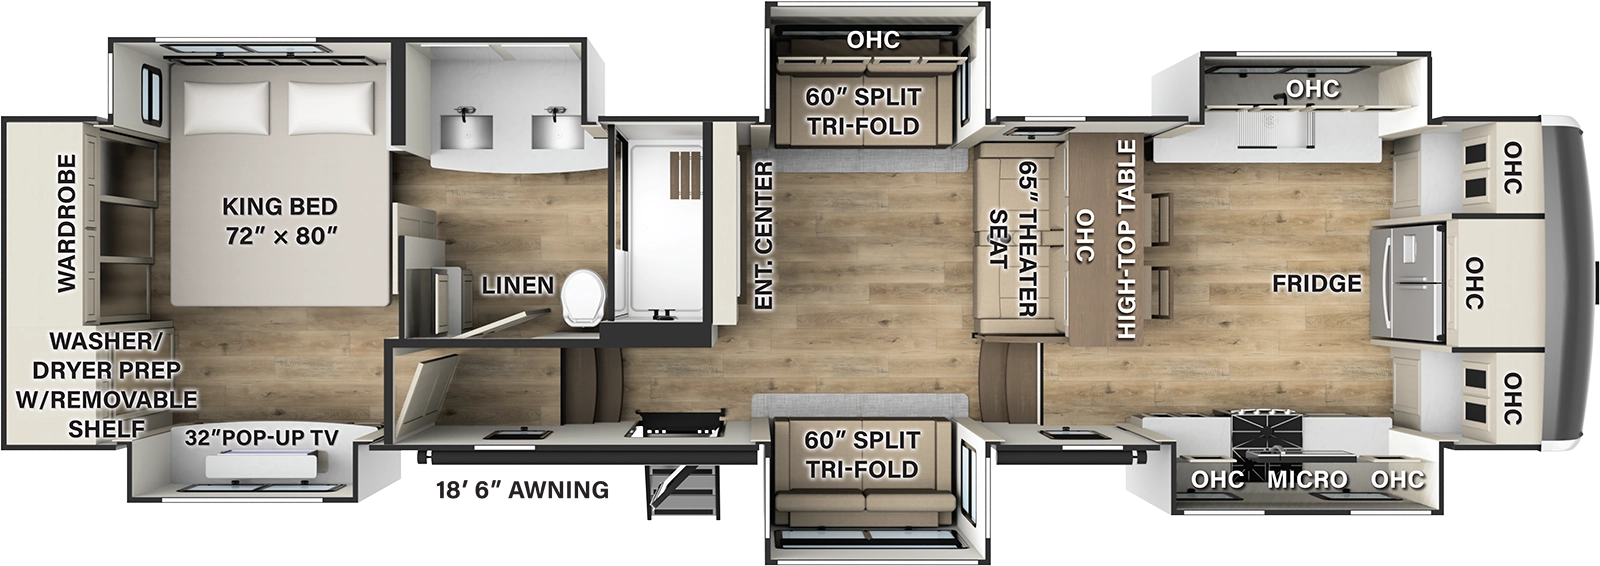 The 388FK has 5 slide outs, three on the road side and two on the camp side, along with one entry door on the camp side. Interior layout from front to back: front kitchen with residential refrigerator, road side slide out containing double basin sink, cabinets and overhead microwave; the camp side slide out containing cabinets, oven and cooktop. Living room with theater seat and entertainment center, road side slide out containing trifold sofa; camp side slide out containing trifold sofa; side aisle bathroom with road side slide out containing two sinks and cabinets; rear bedroom with king size bed in road side slide. Exterior storage below the rear bedroom.  
